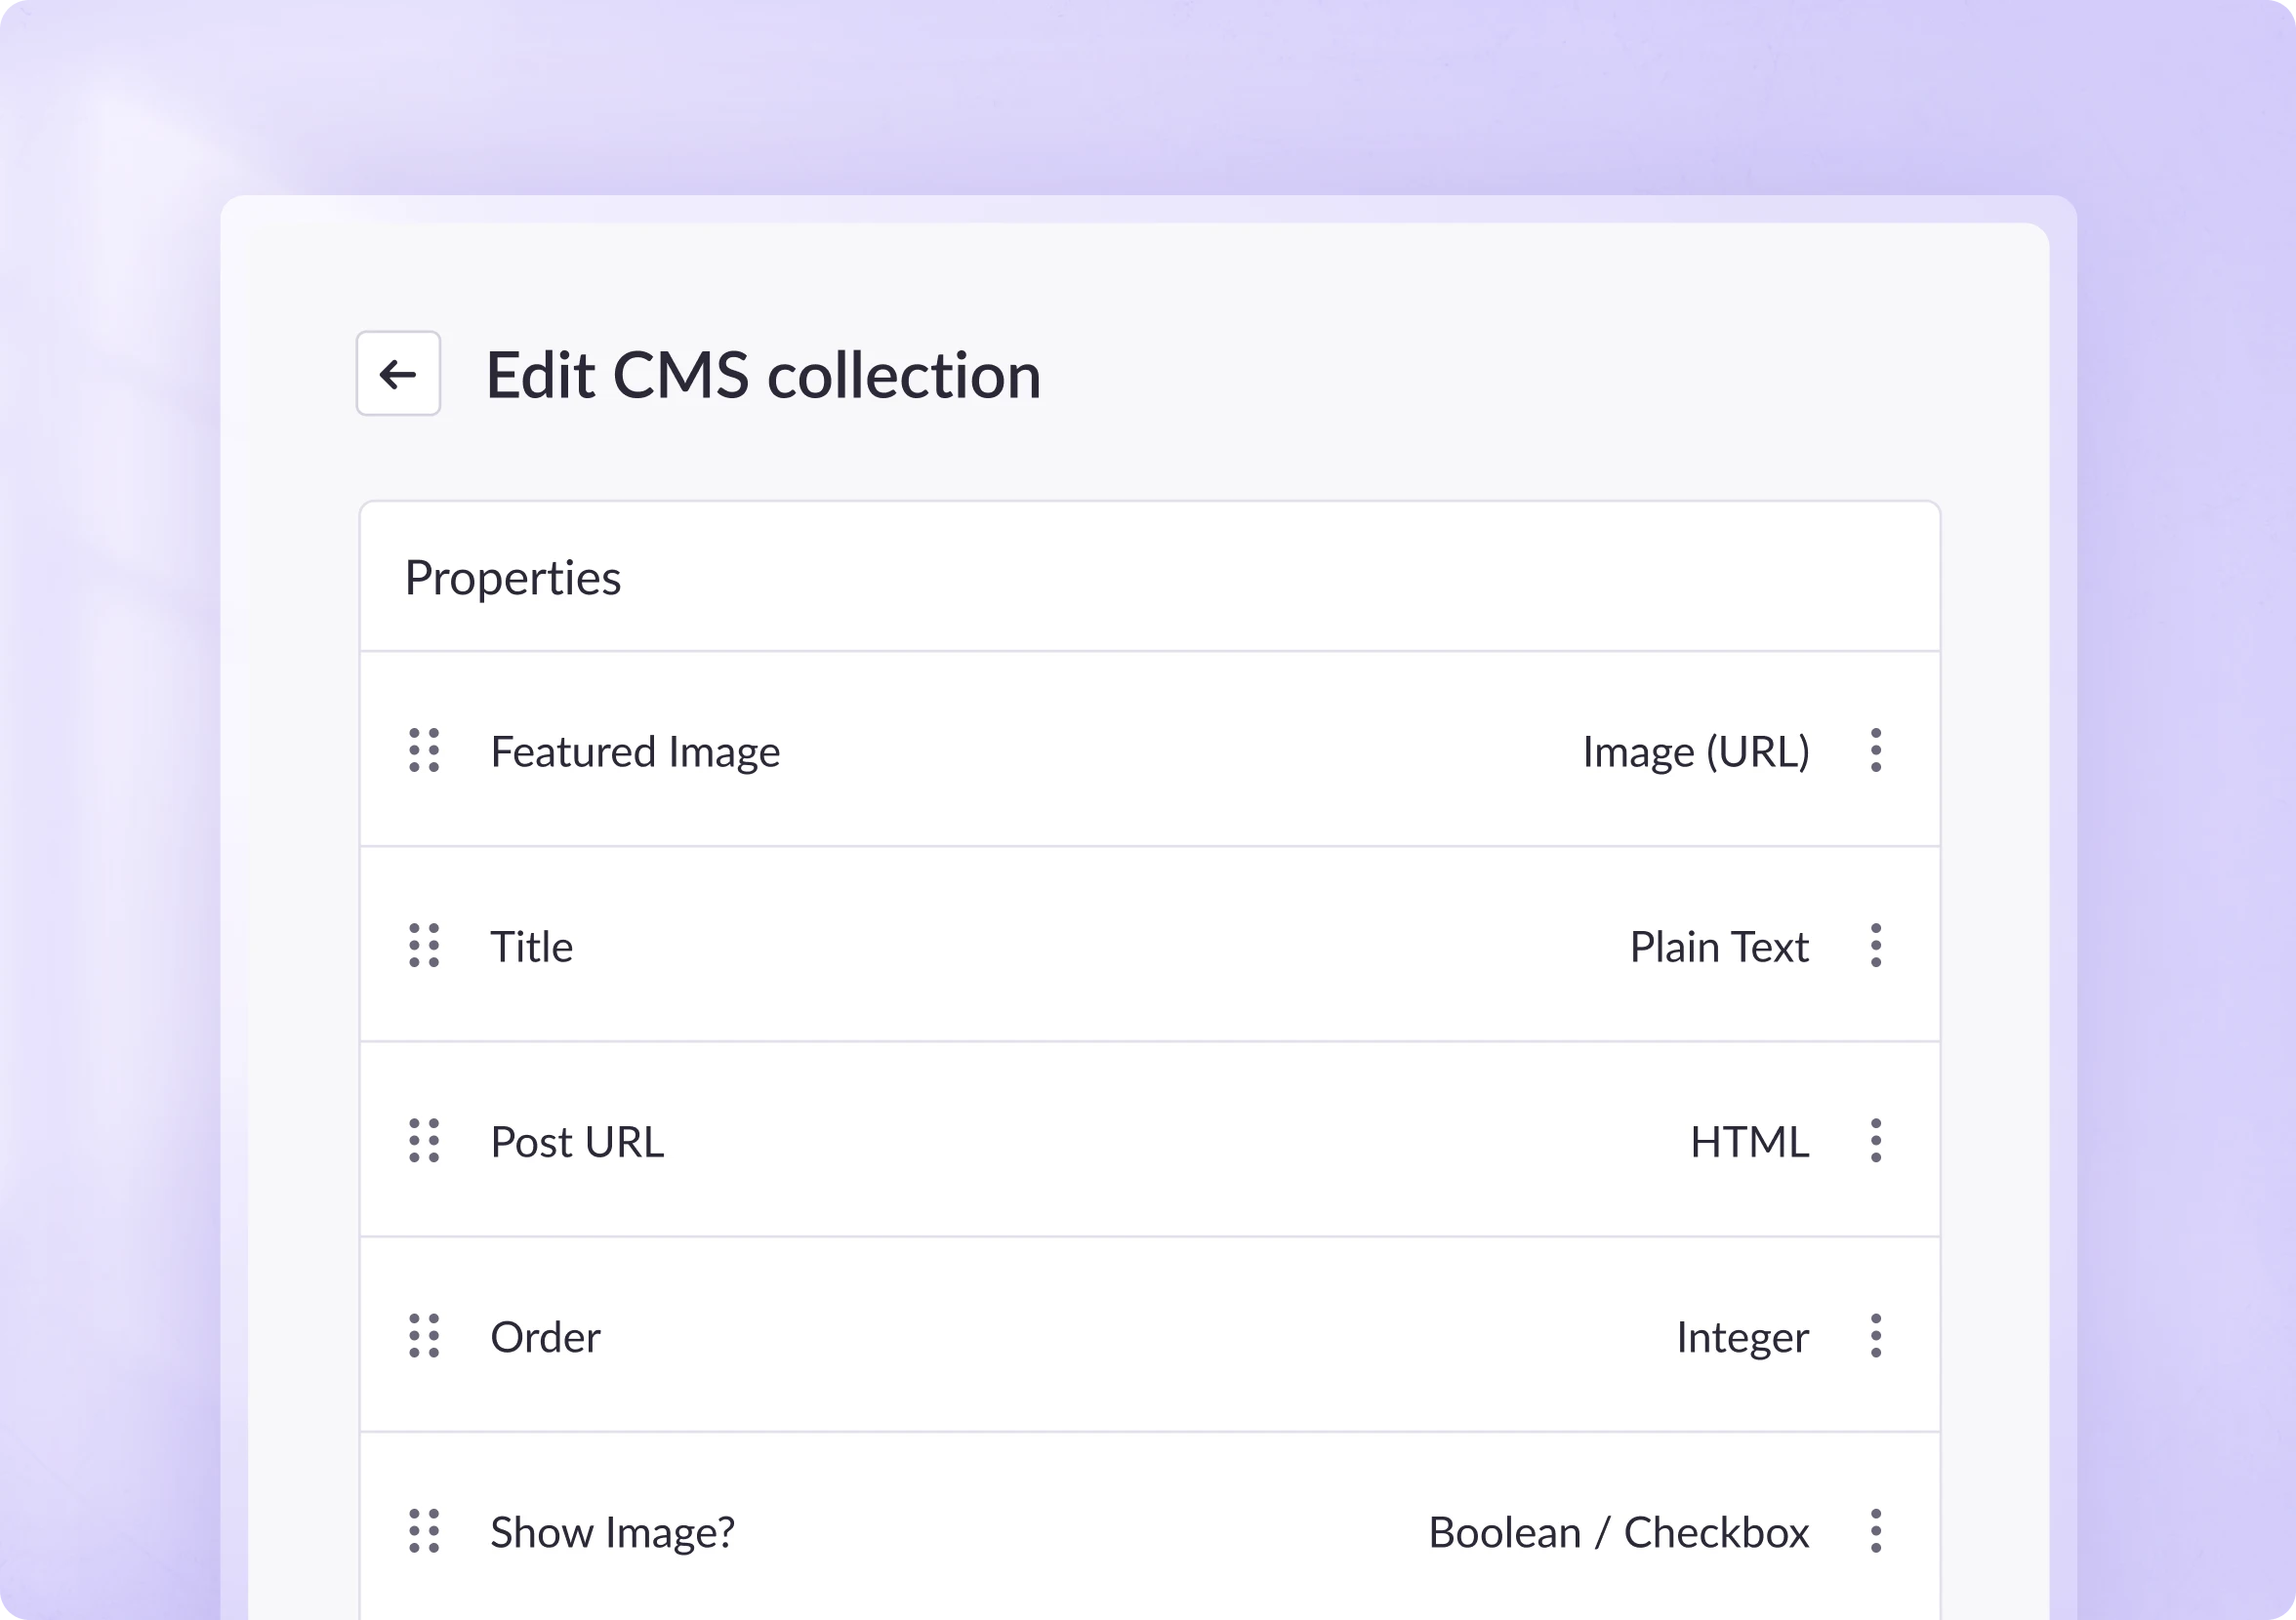 Editing a CMS collection